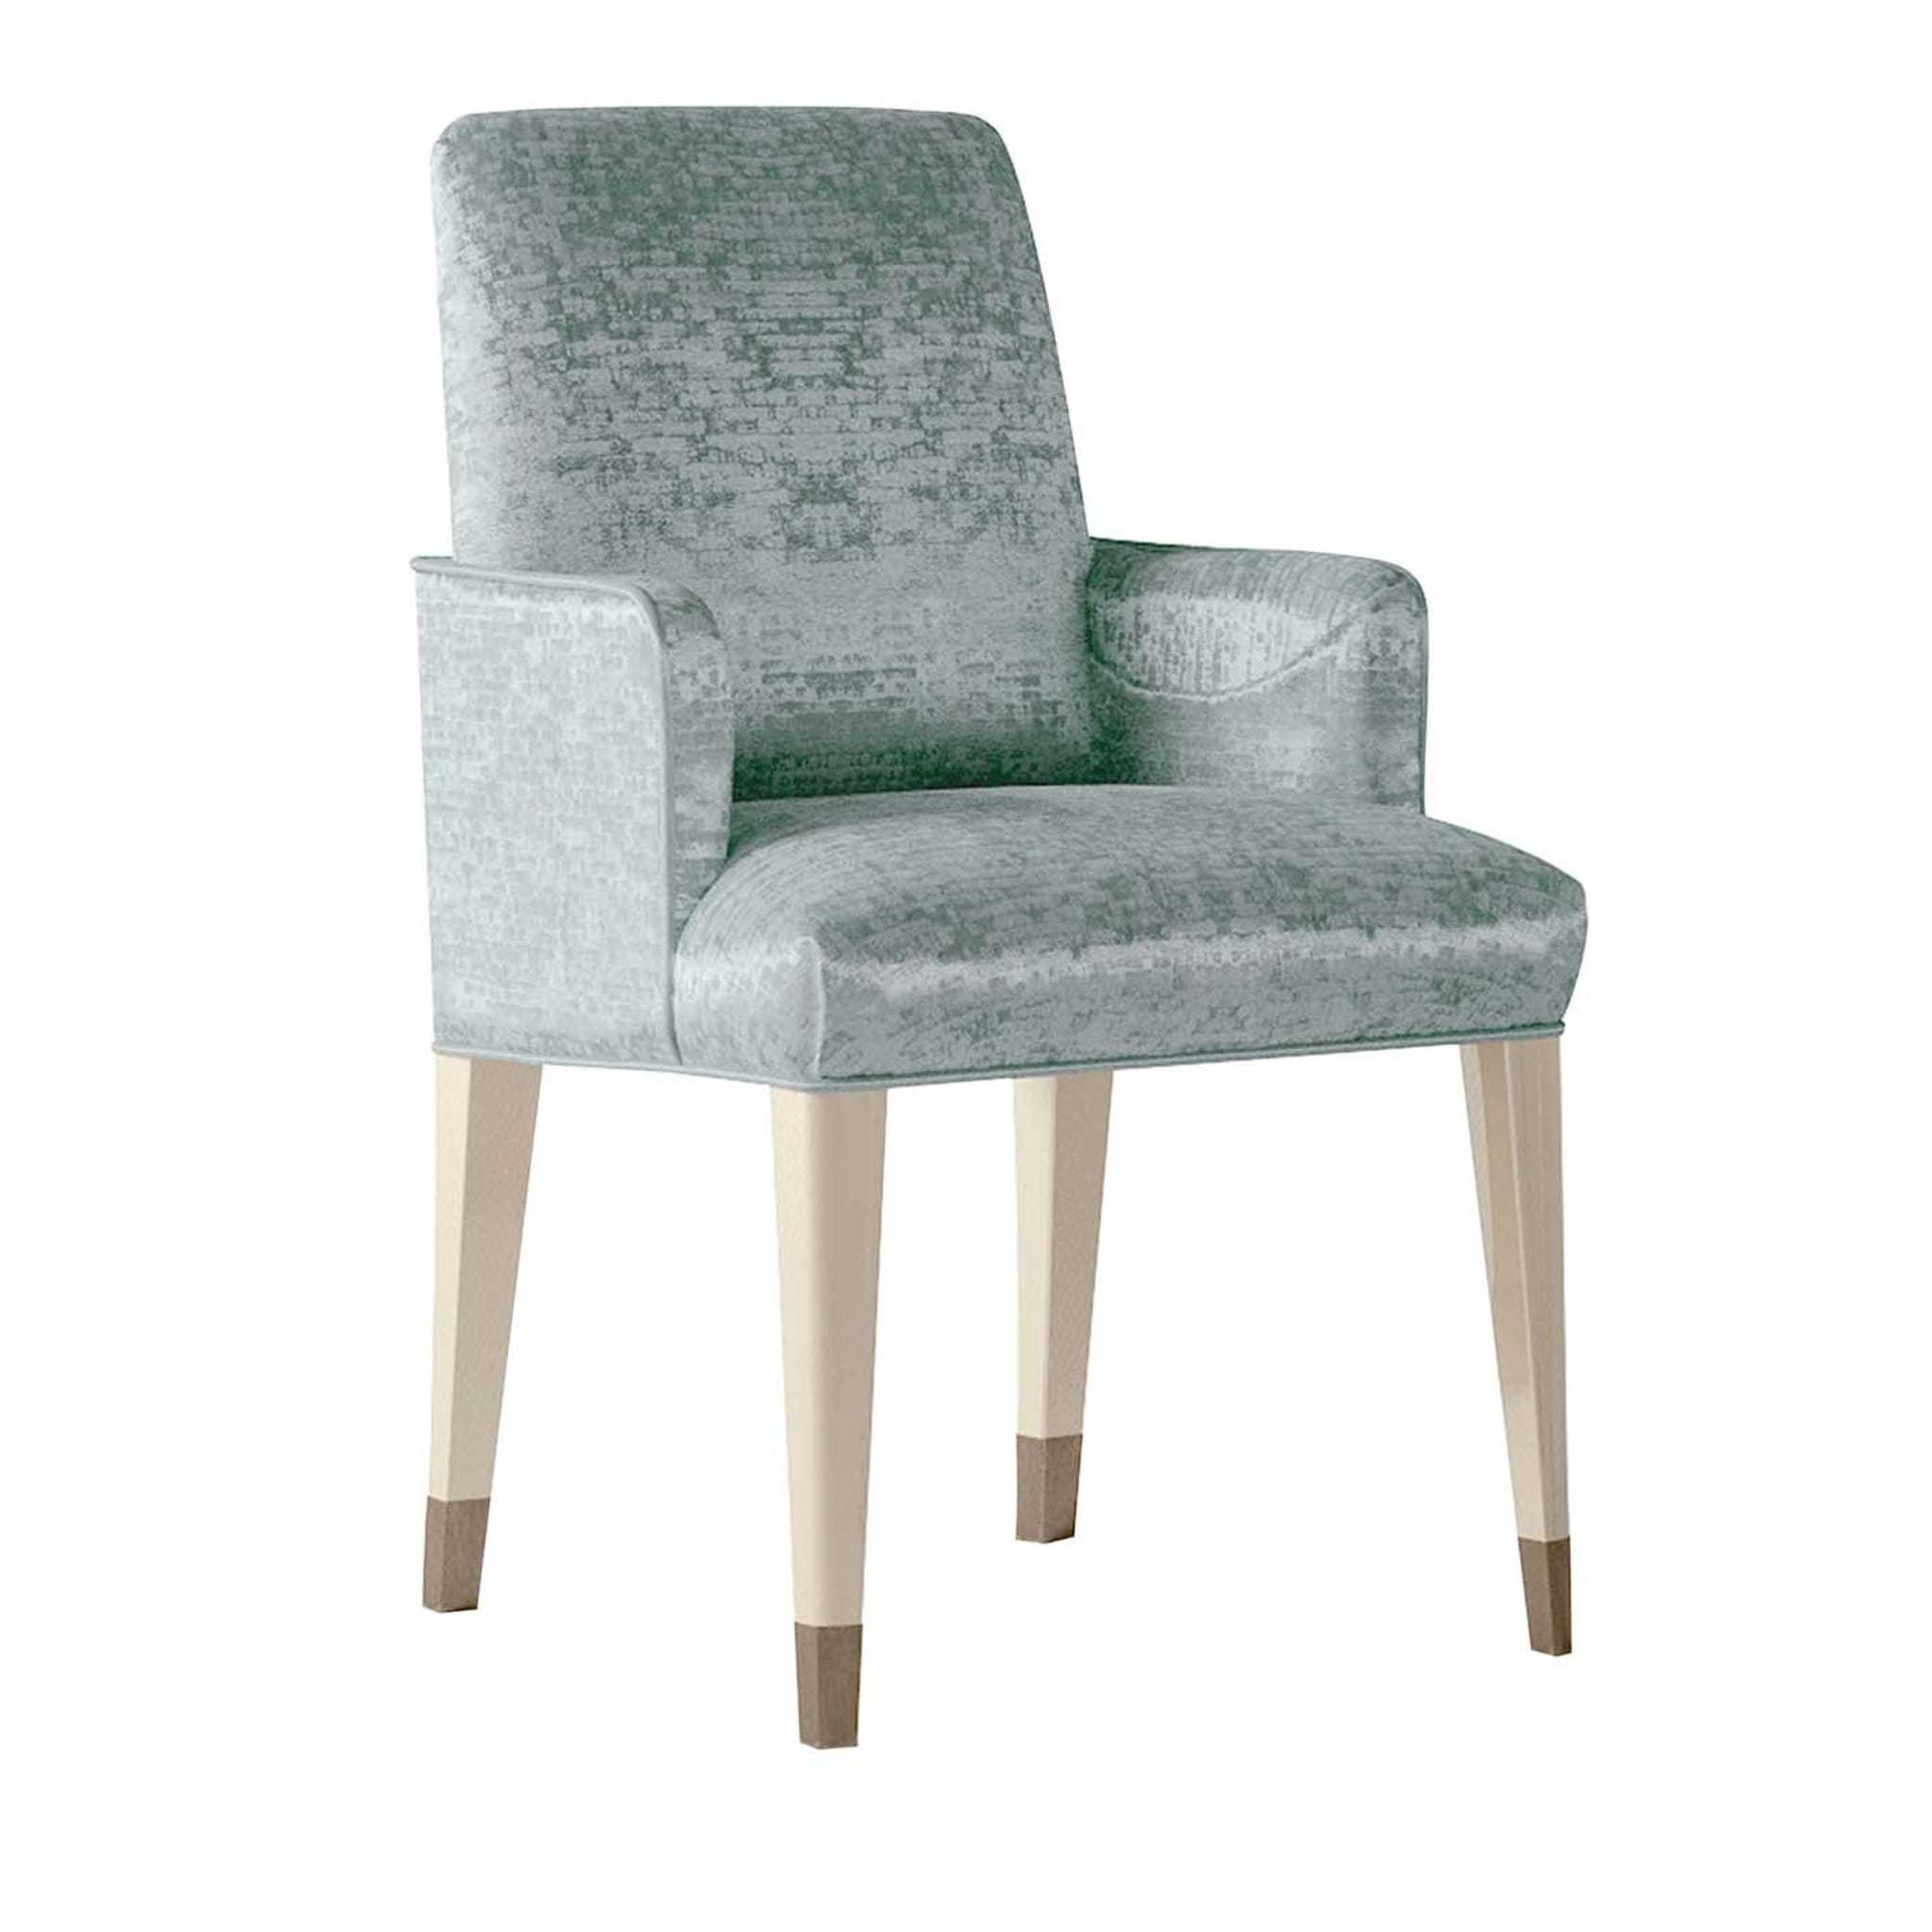 Holly Light Blue Dining chair #2 - Main view